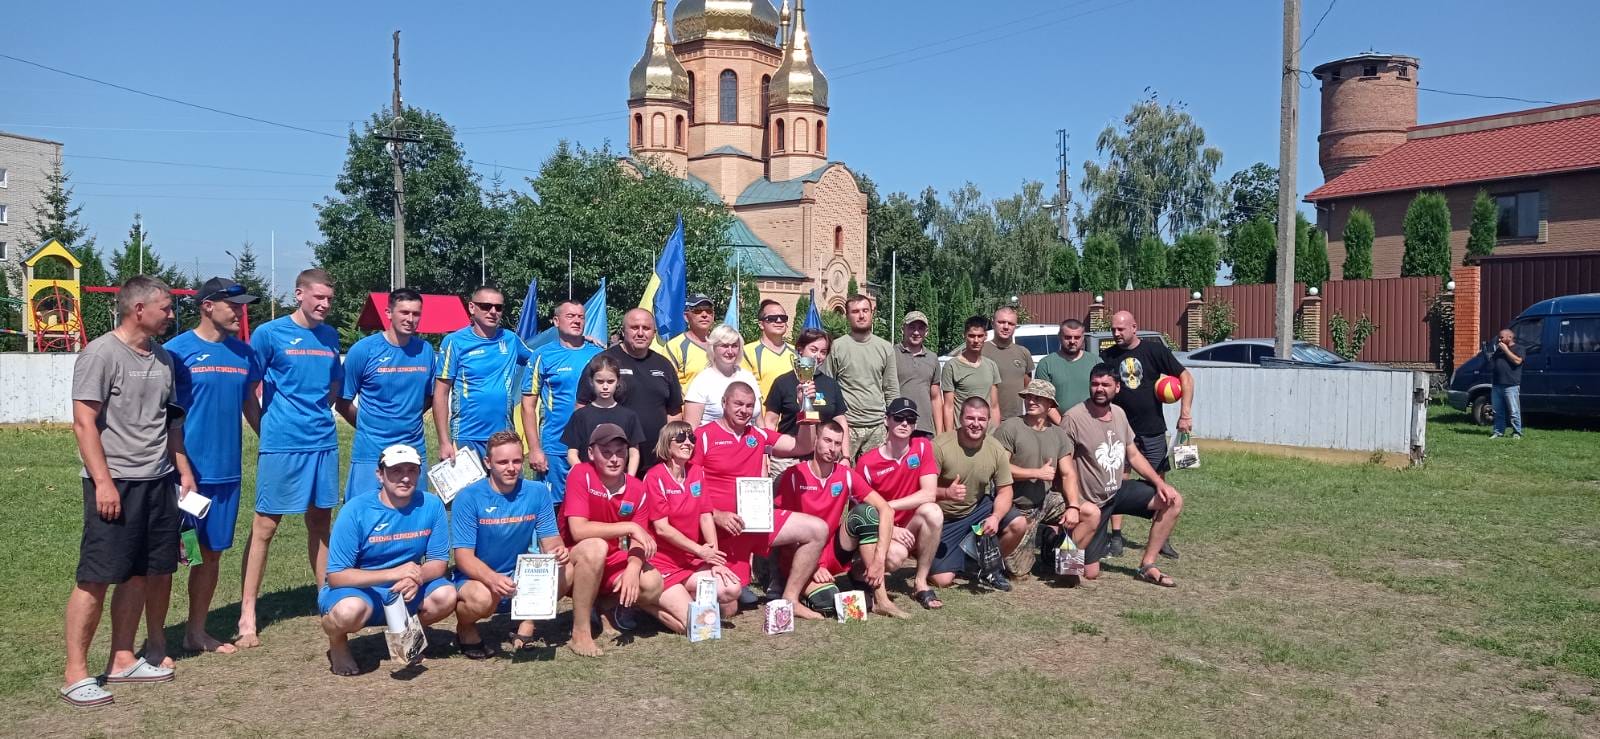 Volleyball tournament of the Yampil community on the occasion of the Independence Day of Ukraine